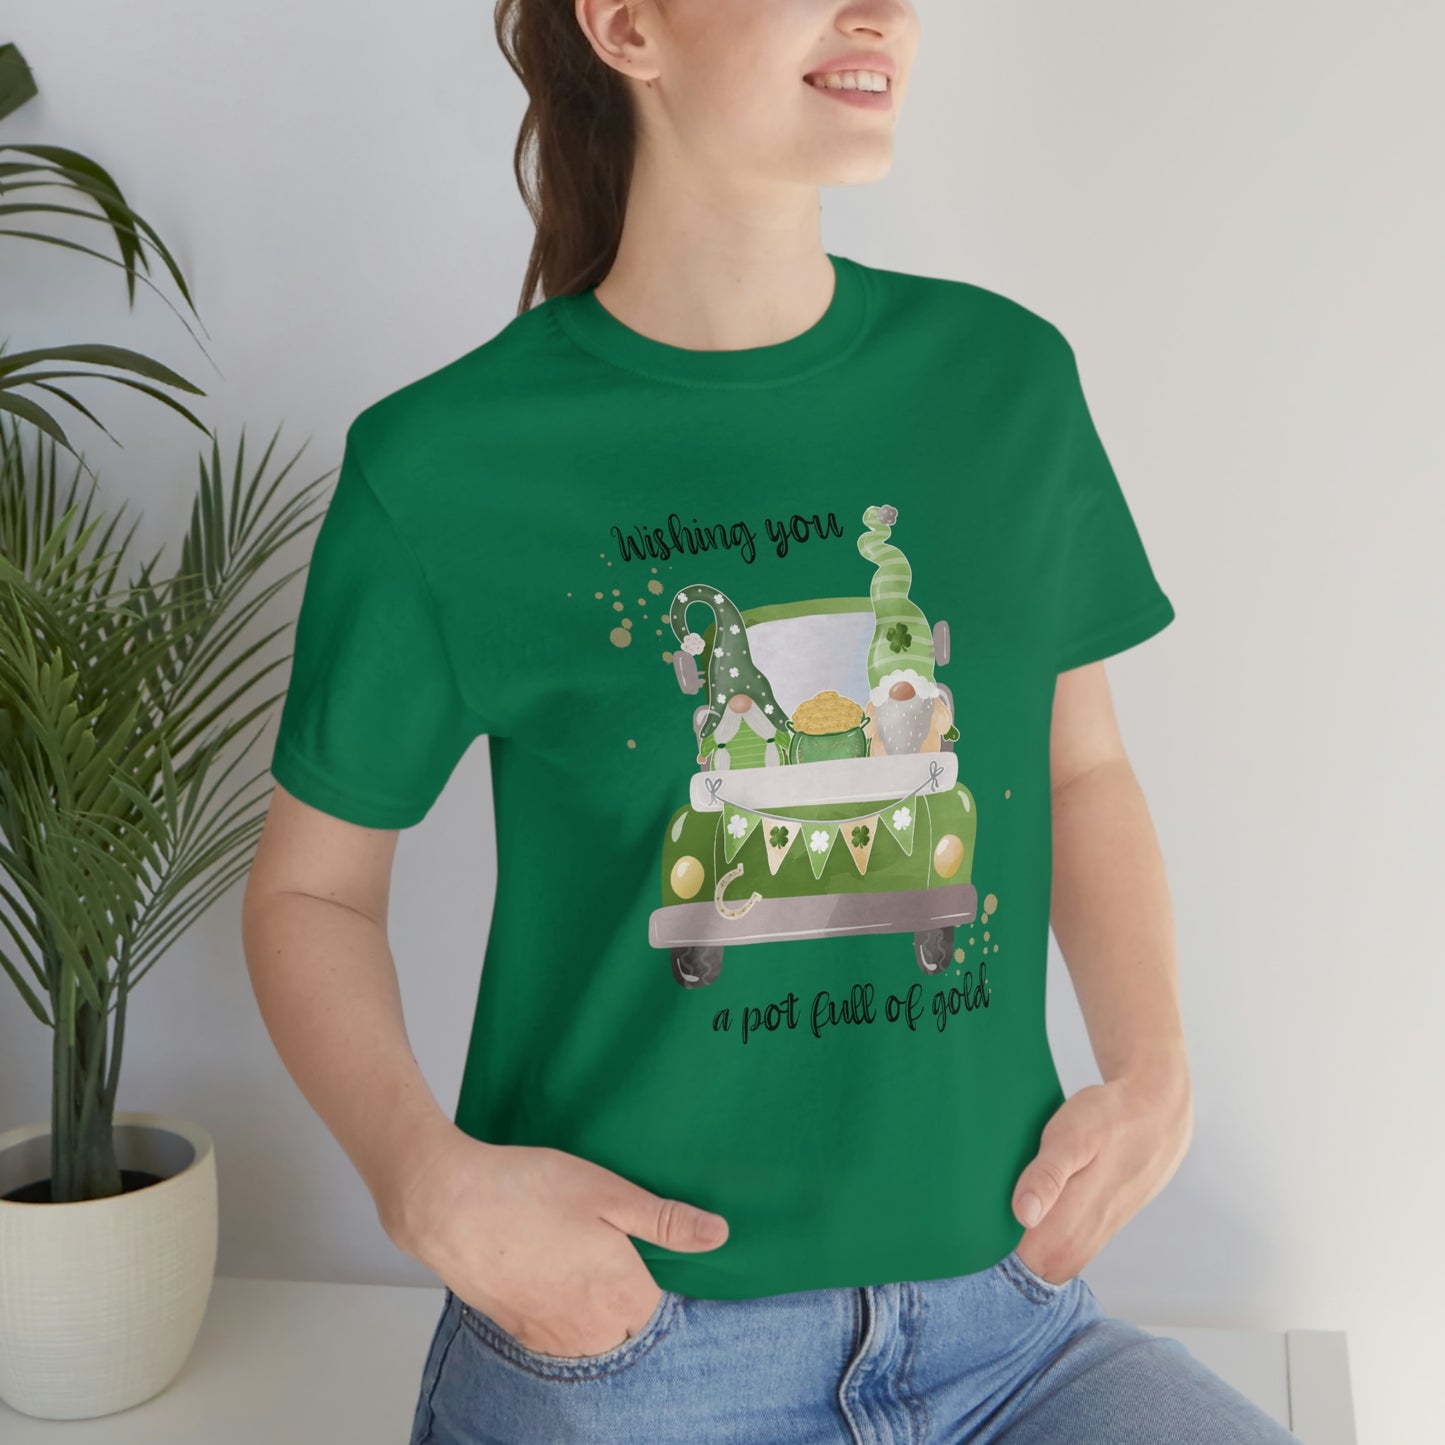 Wishing You a Pot Full Of Gold Short Sleeve Tee